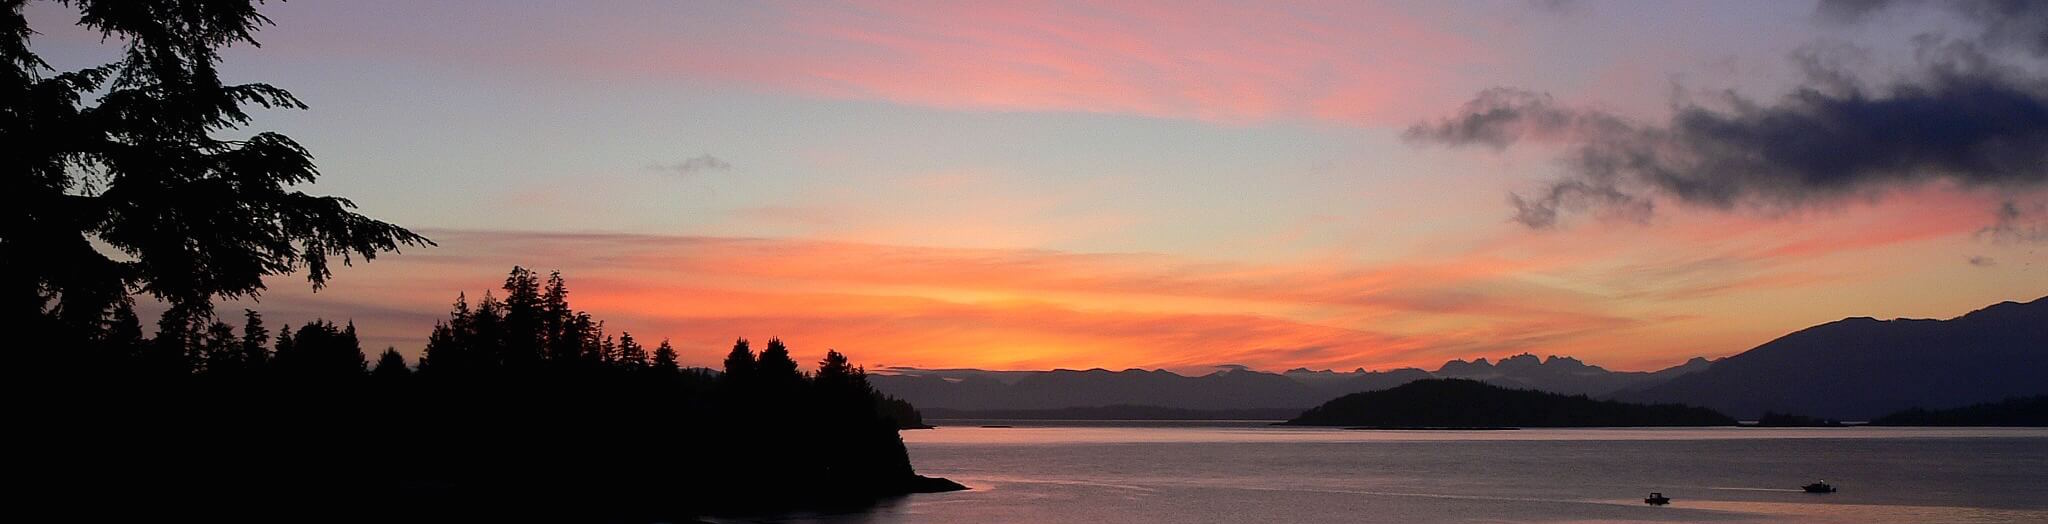 Beautiful Bamfield Sunset with pink sky over water